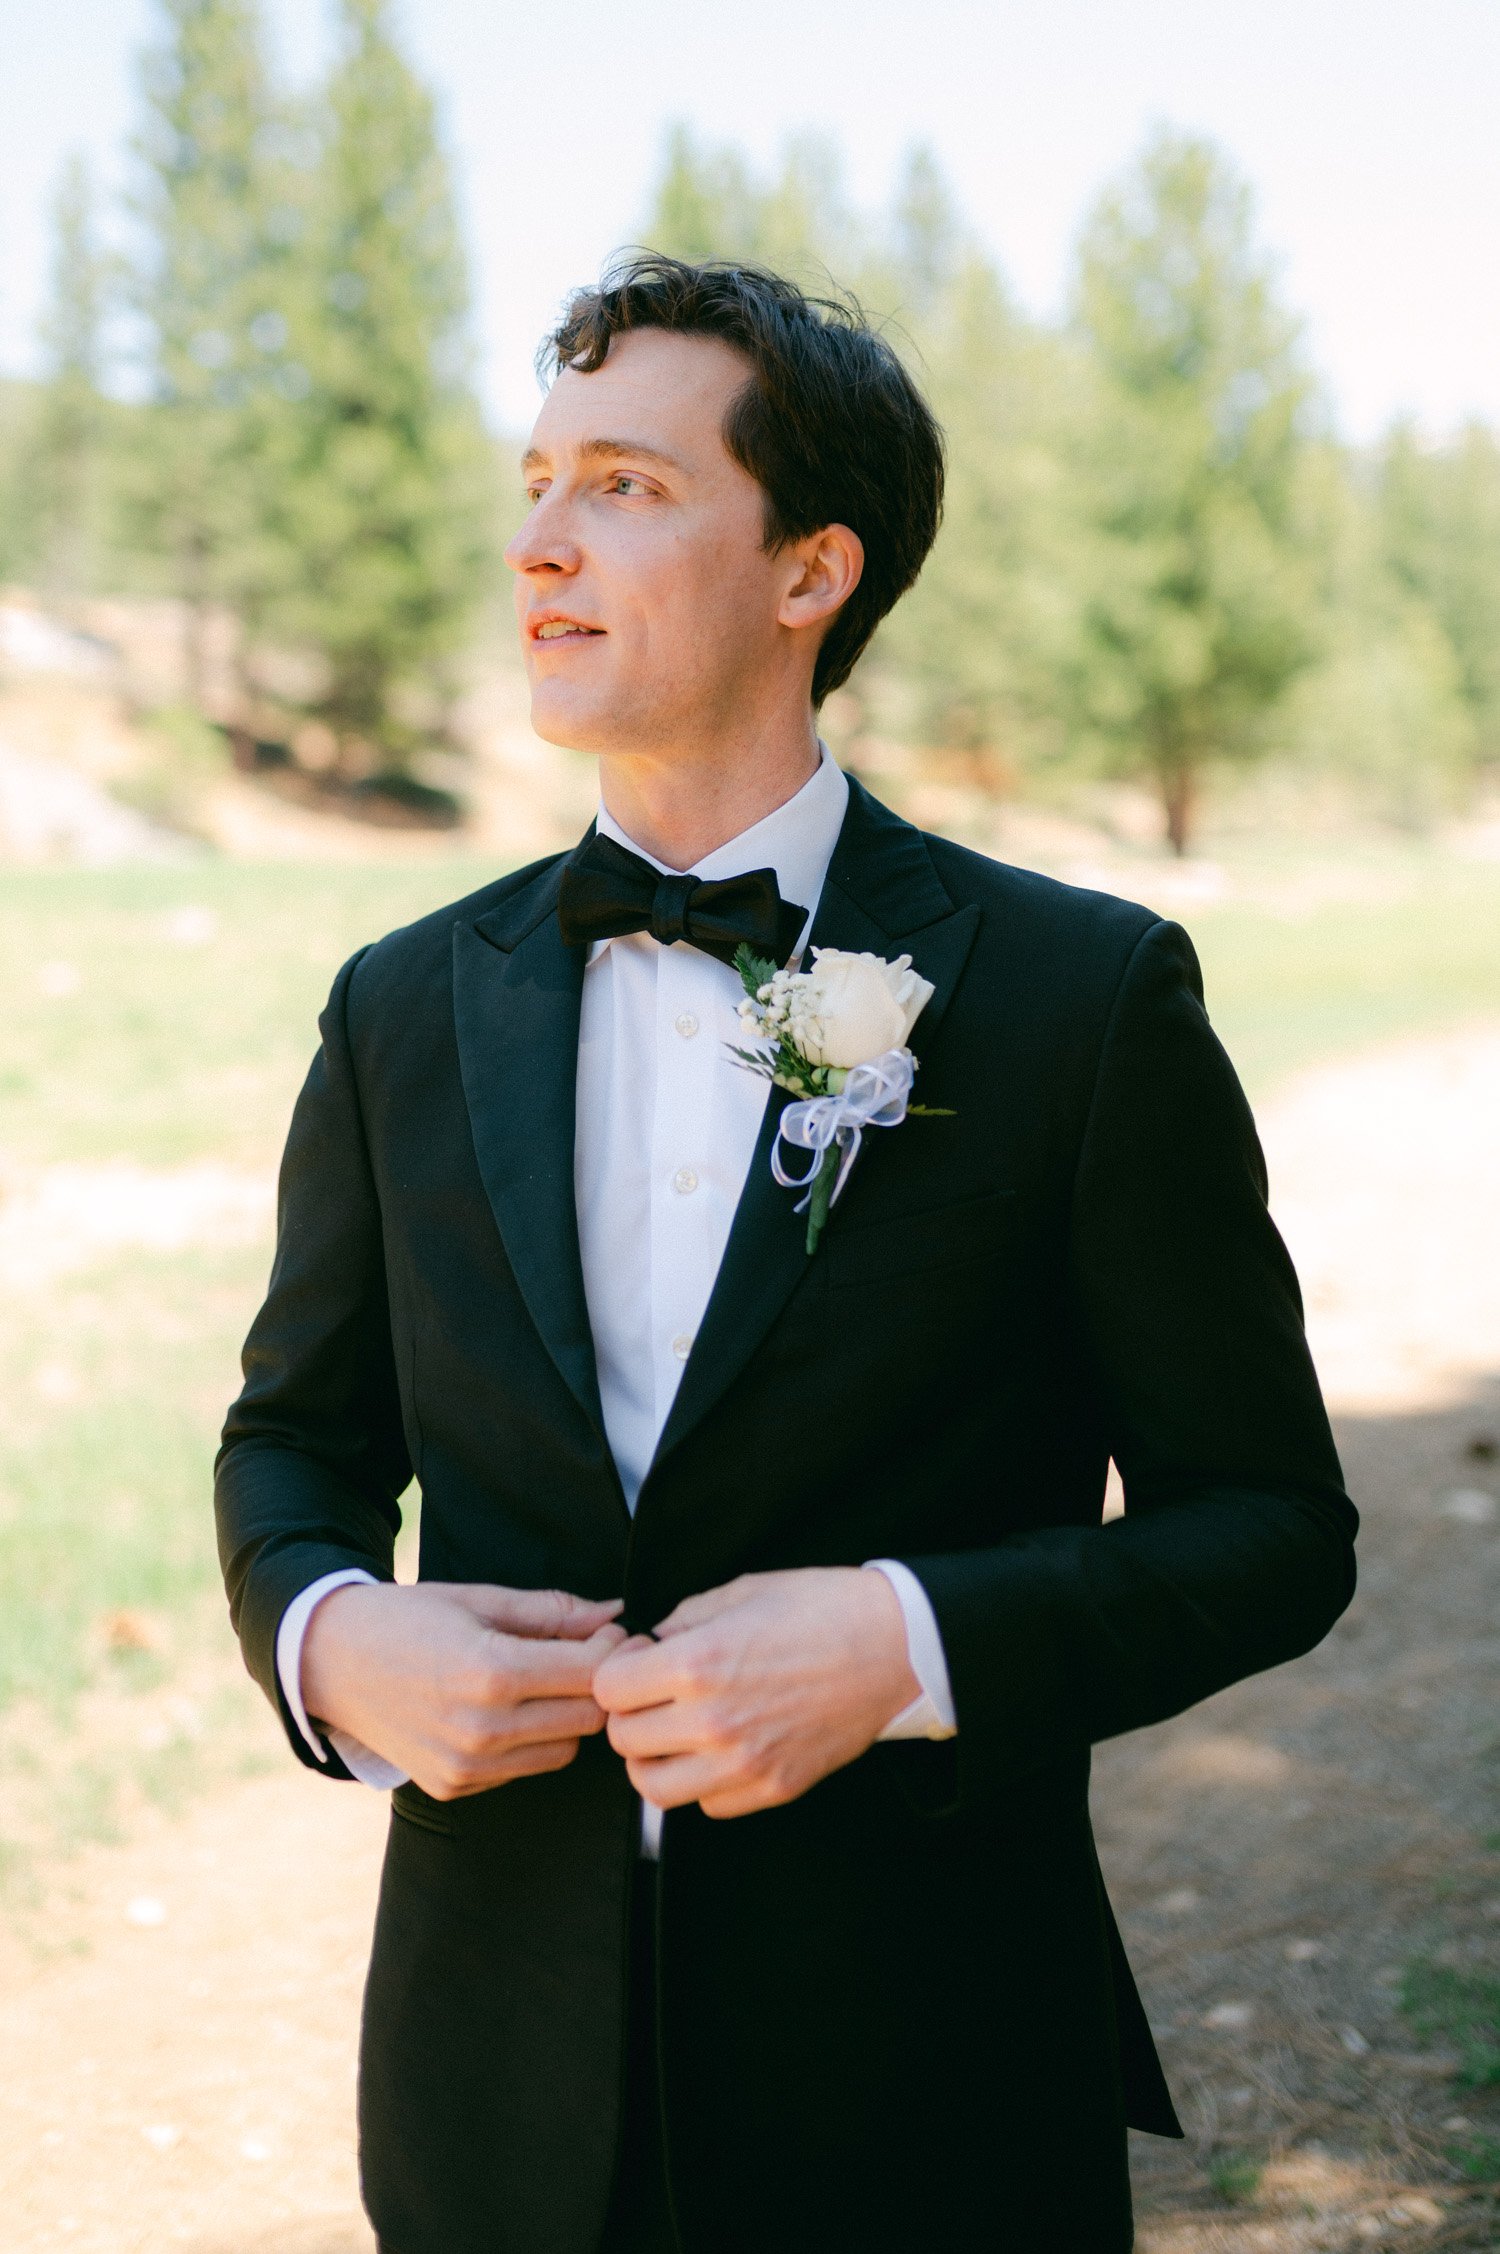 tahoe event center - lake tahoe wedding, photo of the groom preparing for their wedding